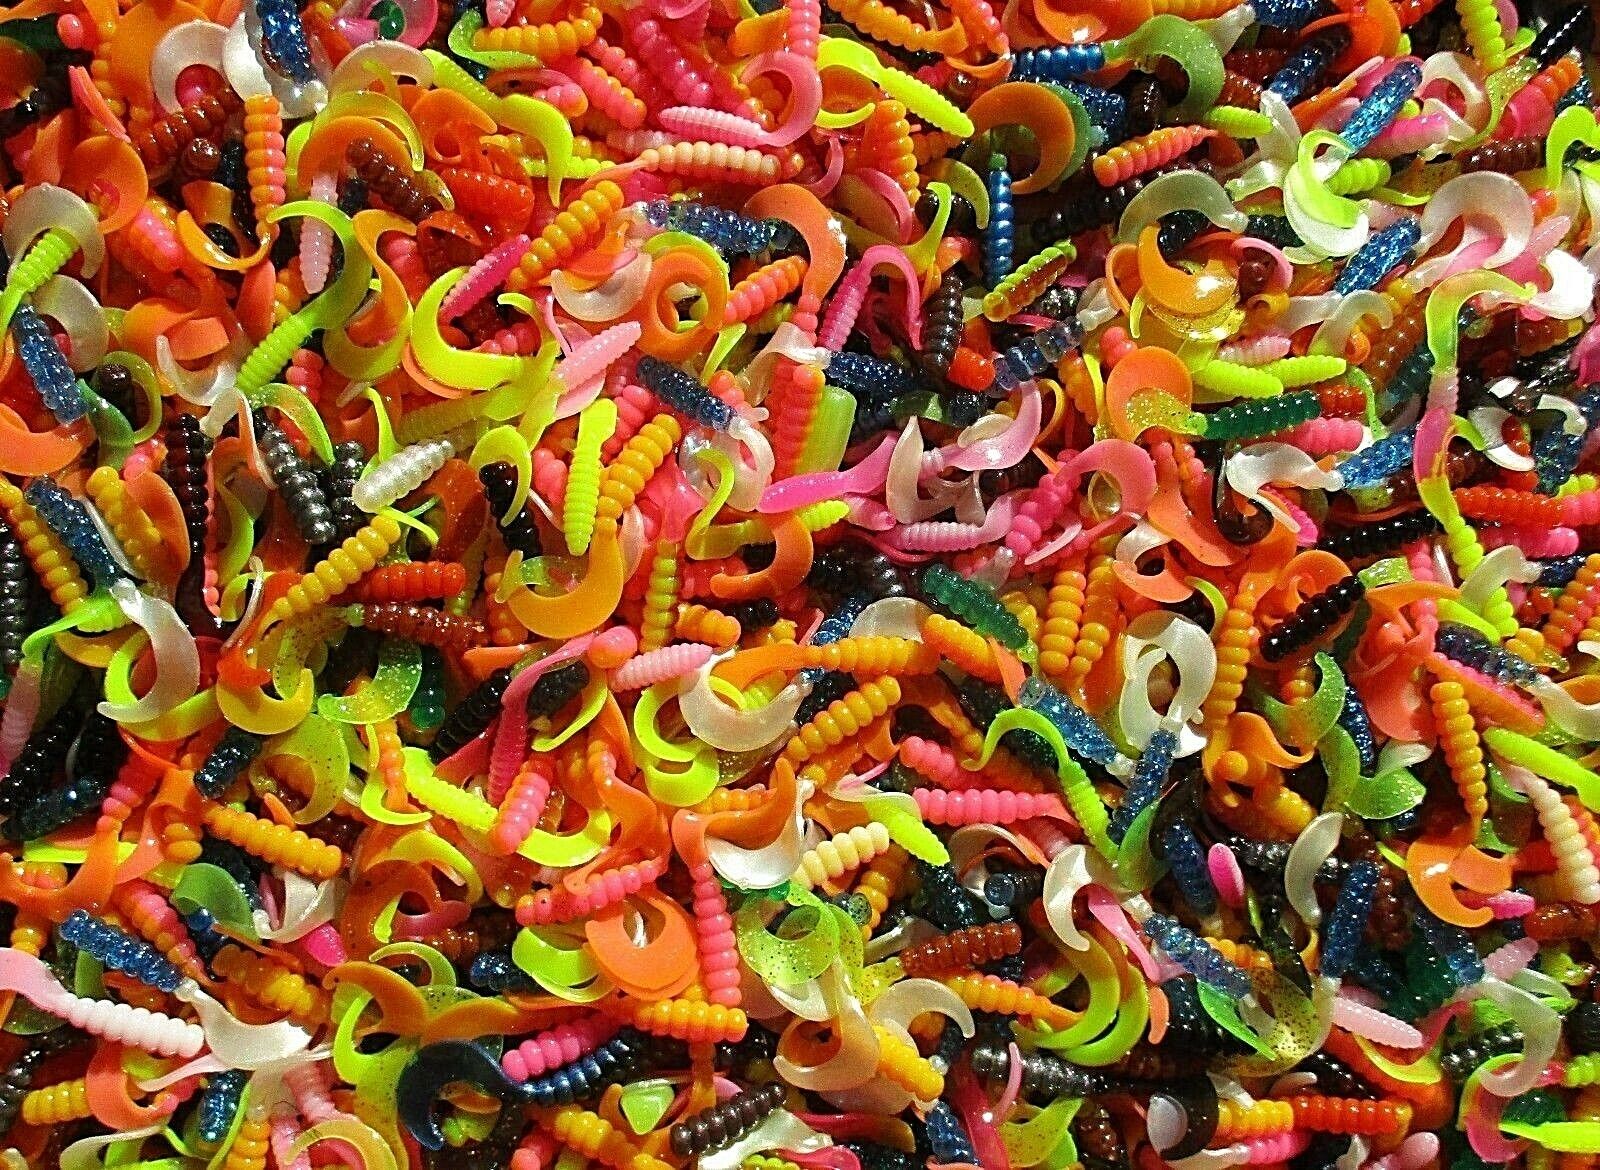 100 ASSORTED 2" Curly Tail GRUBS Crappie Fishing Lures Trout Panfish Perch Baits All American Tournament Quality Soft Plastic Baits 2CTGrubs.Asst100ct - фотография #6